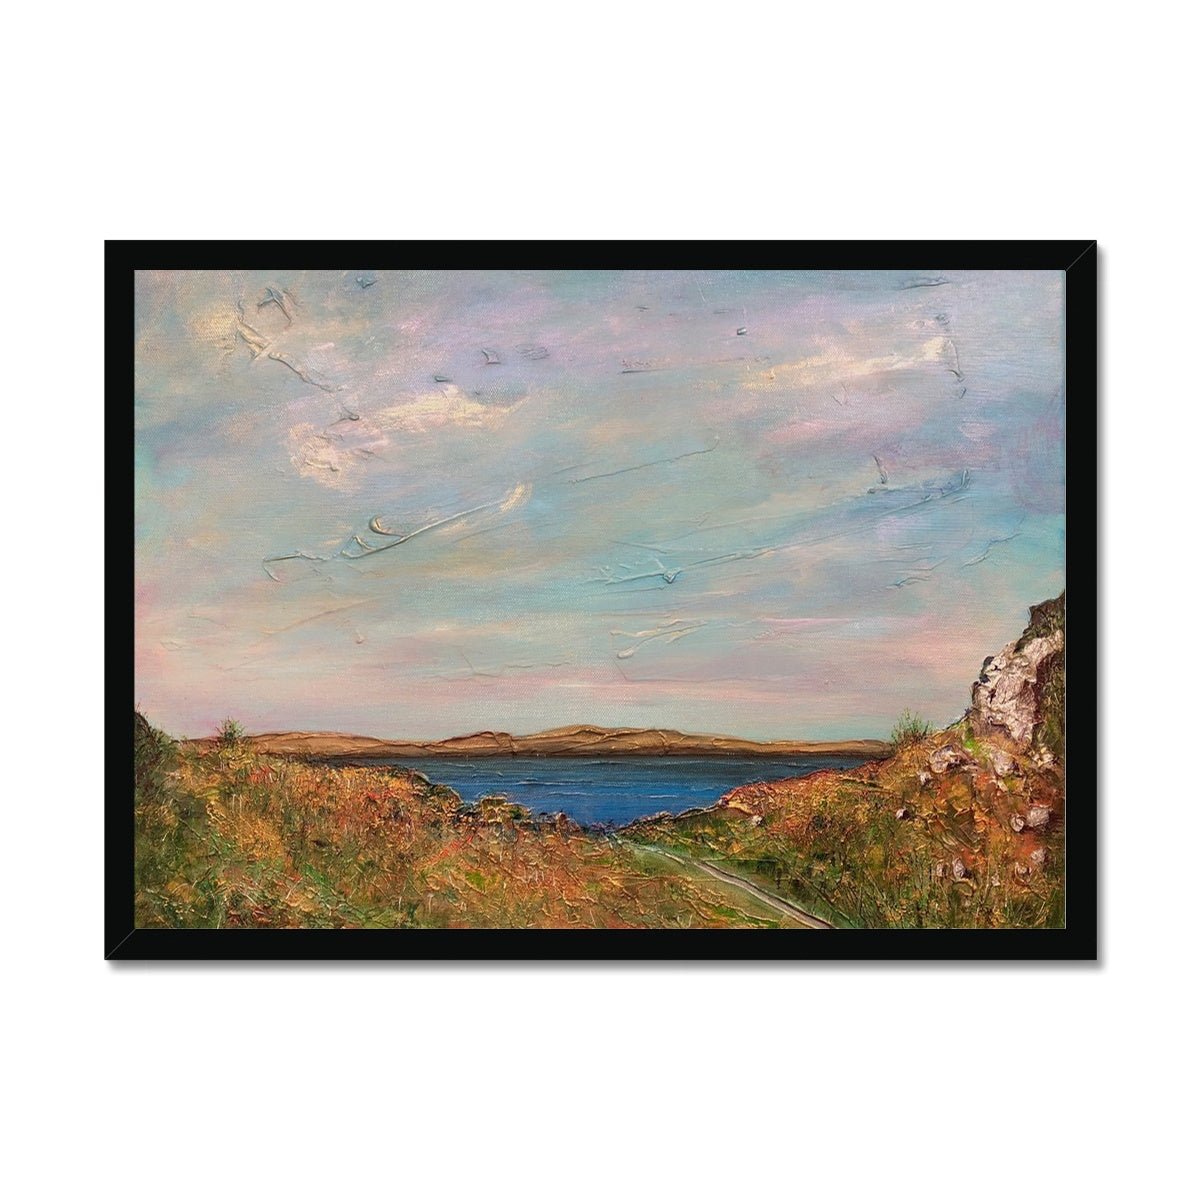 Jura From Crinan Painting | Framed Prints From Scotland-Framed Prints-Hebridean Islands Art Gallery-A2 Landscape-Black Frame-Paintings, Prints, Homeware, Art Gifts From Scotland By Scottish Artist Kevin Hunter